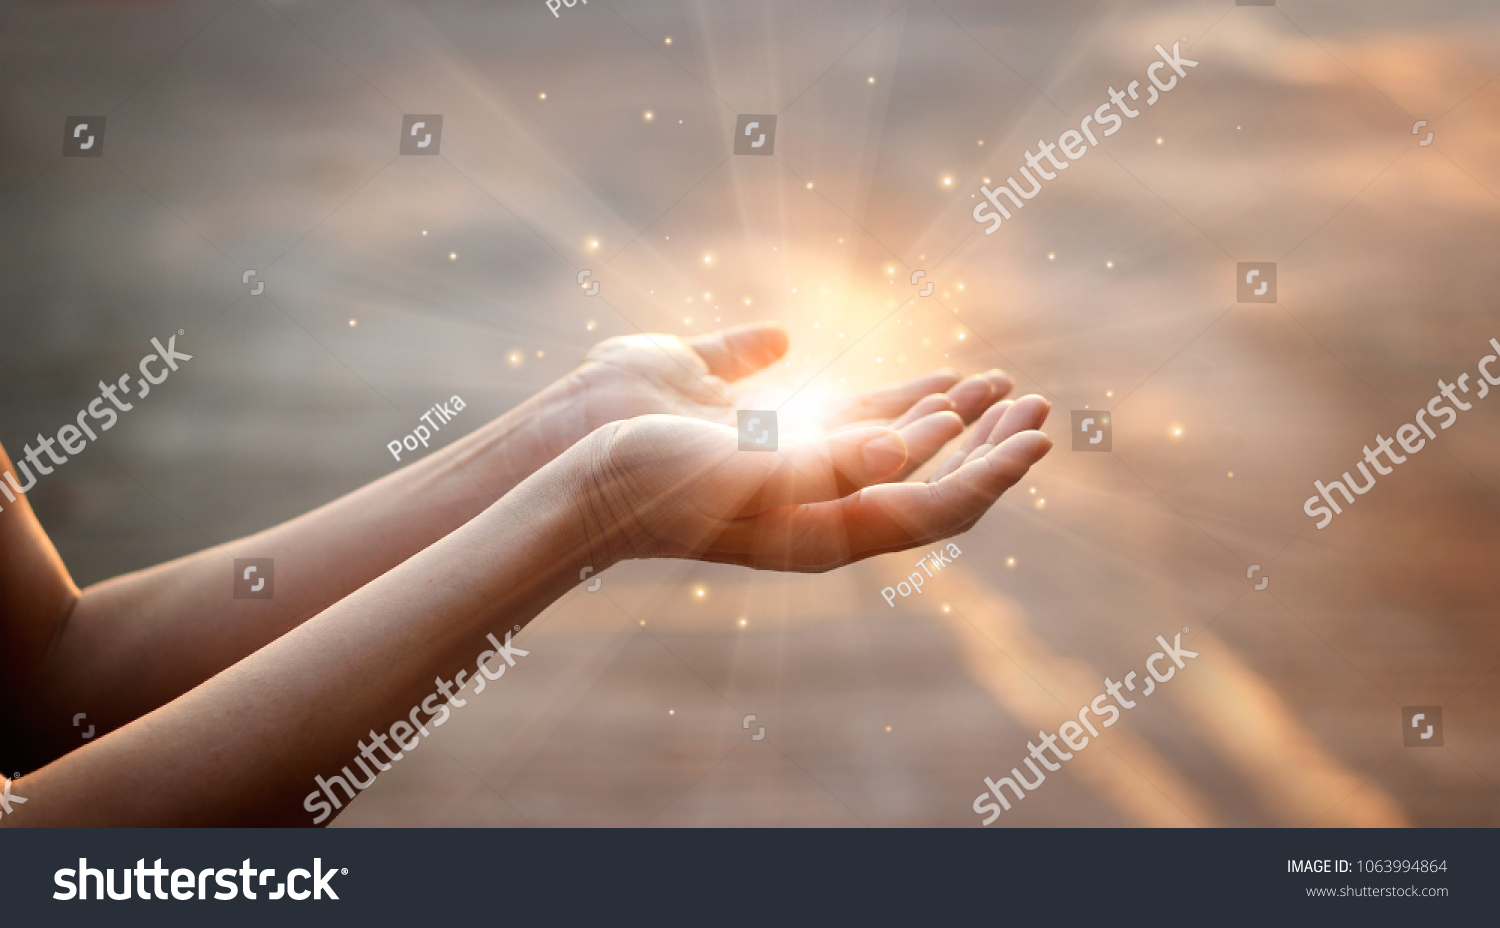 Woman hands praying for blessing from god on sunset background  #1063994864